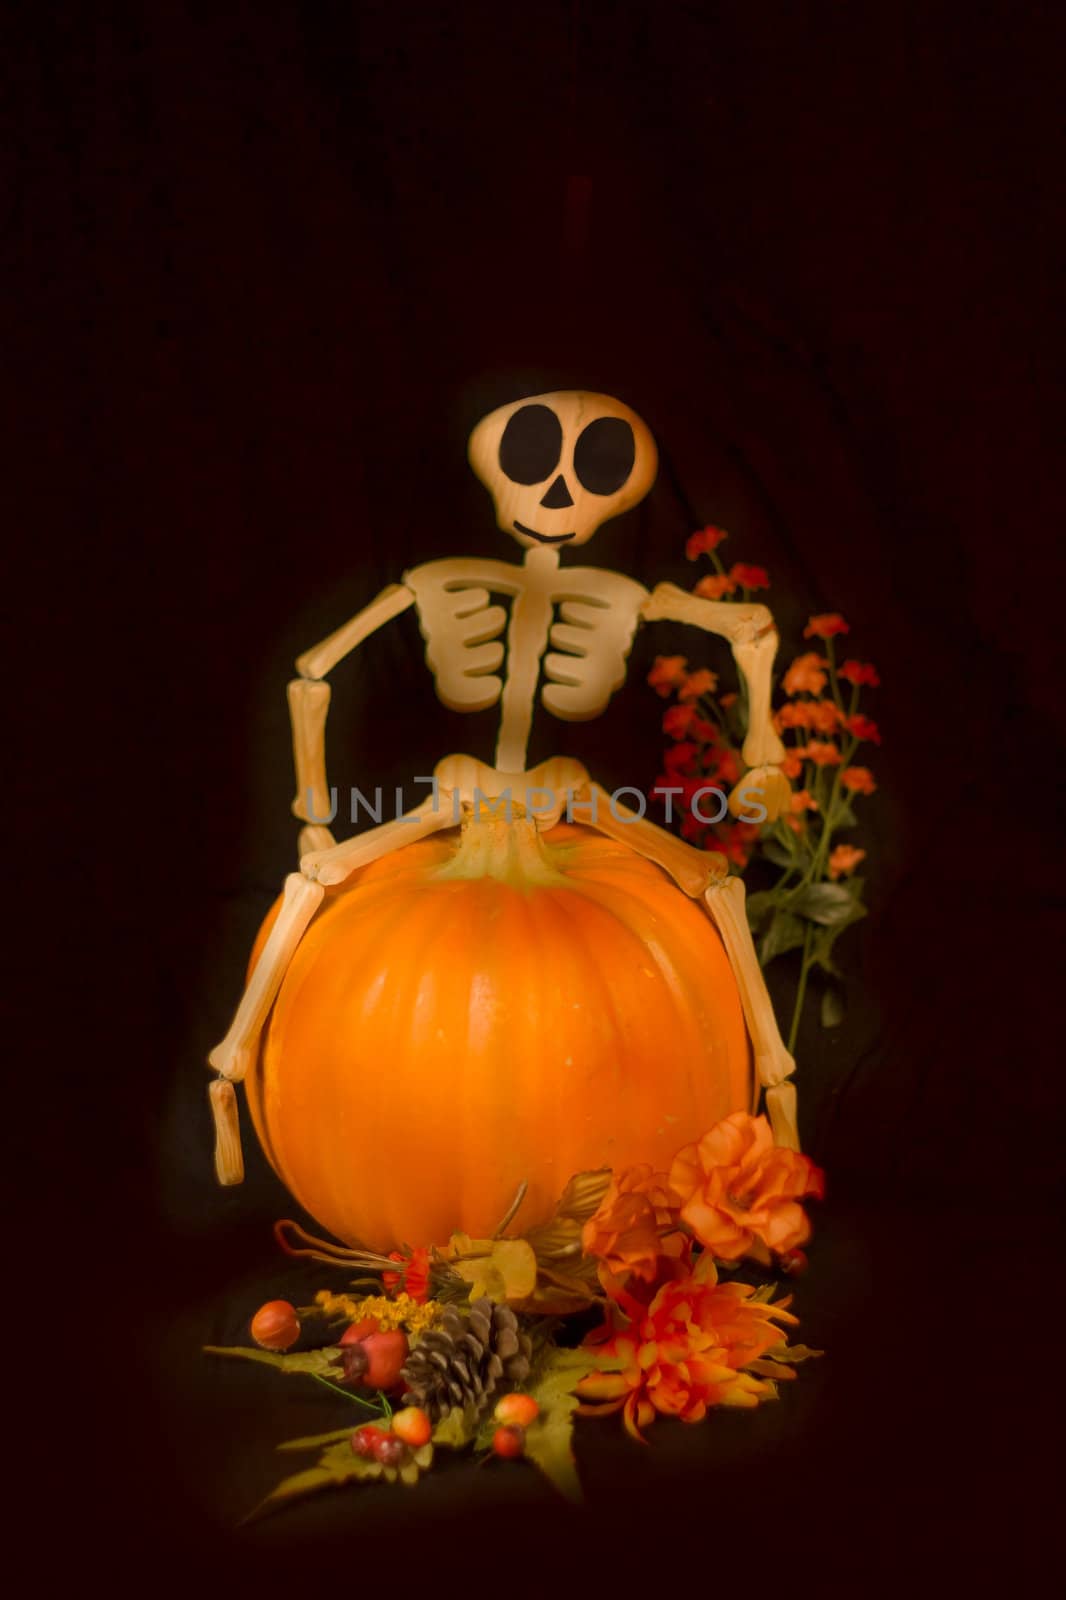 Fall Harvest Halloween with Smiling Skeleton and Pumpkin on a black background.